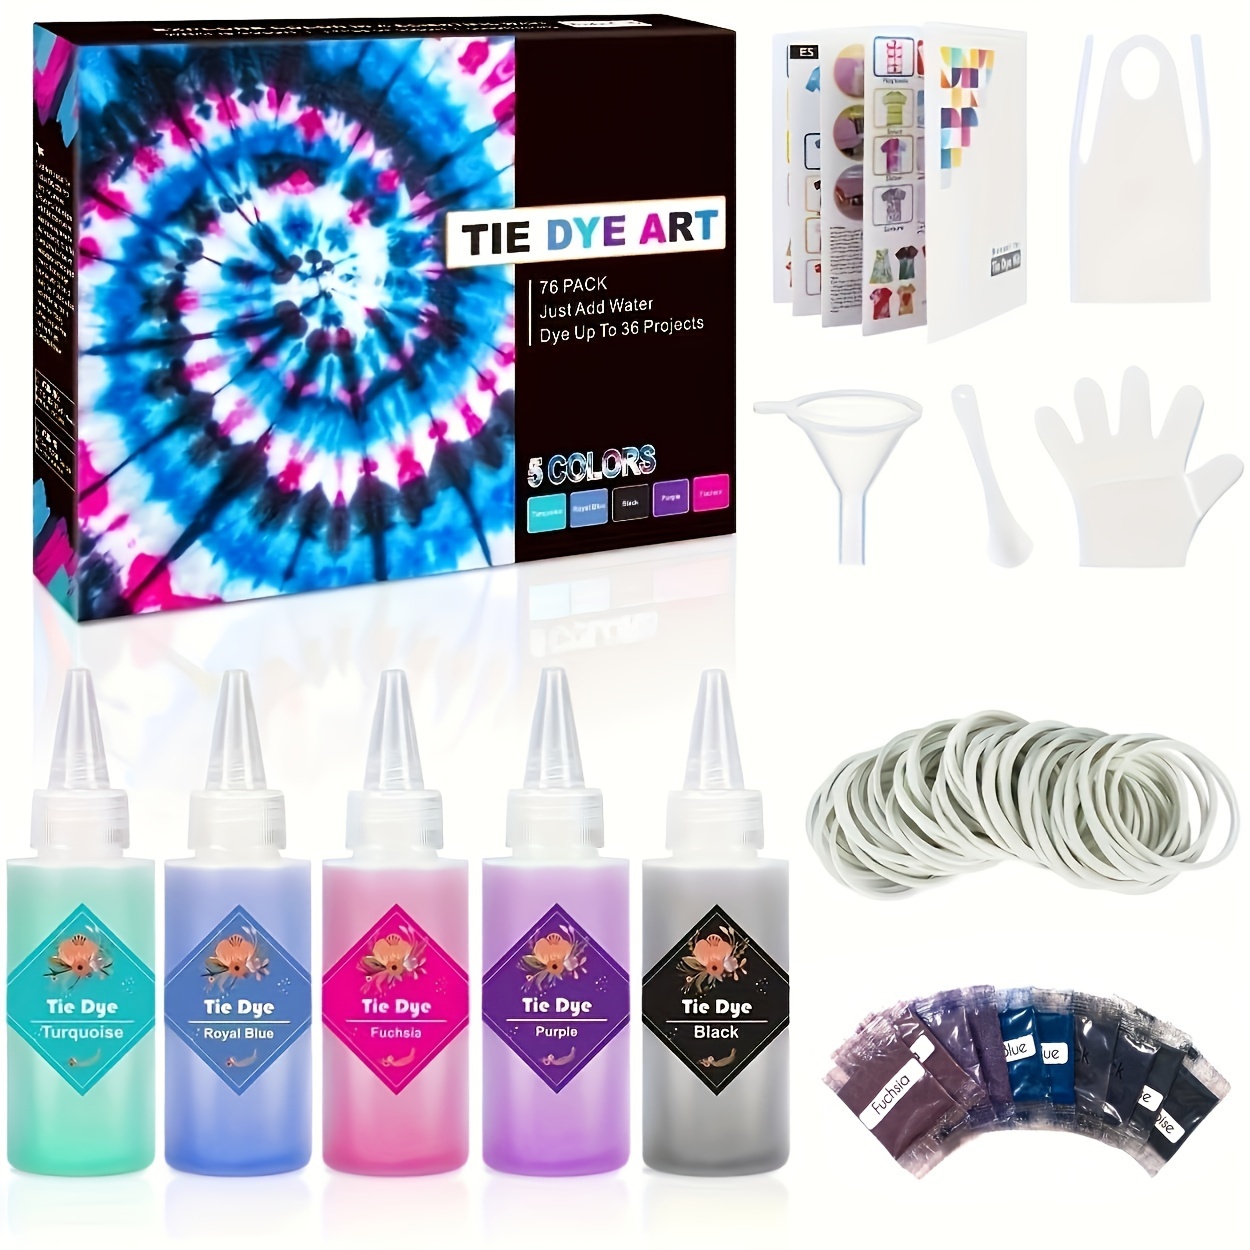 

1set Tie Dye Set, Fabric Dyeing Set, Creative And Personalized Wax Dye T-shirts, Hats, Handbags, Socks, Canvas Slippers And More, The Dye Easy To Dissolve In Water